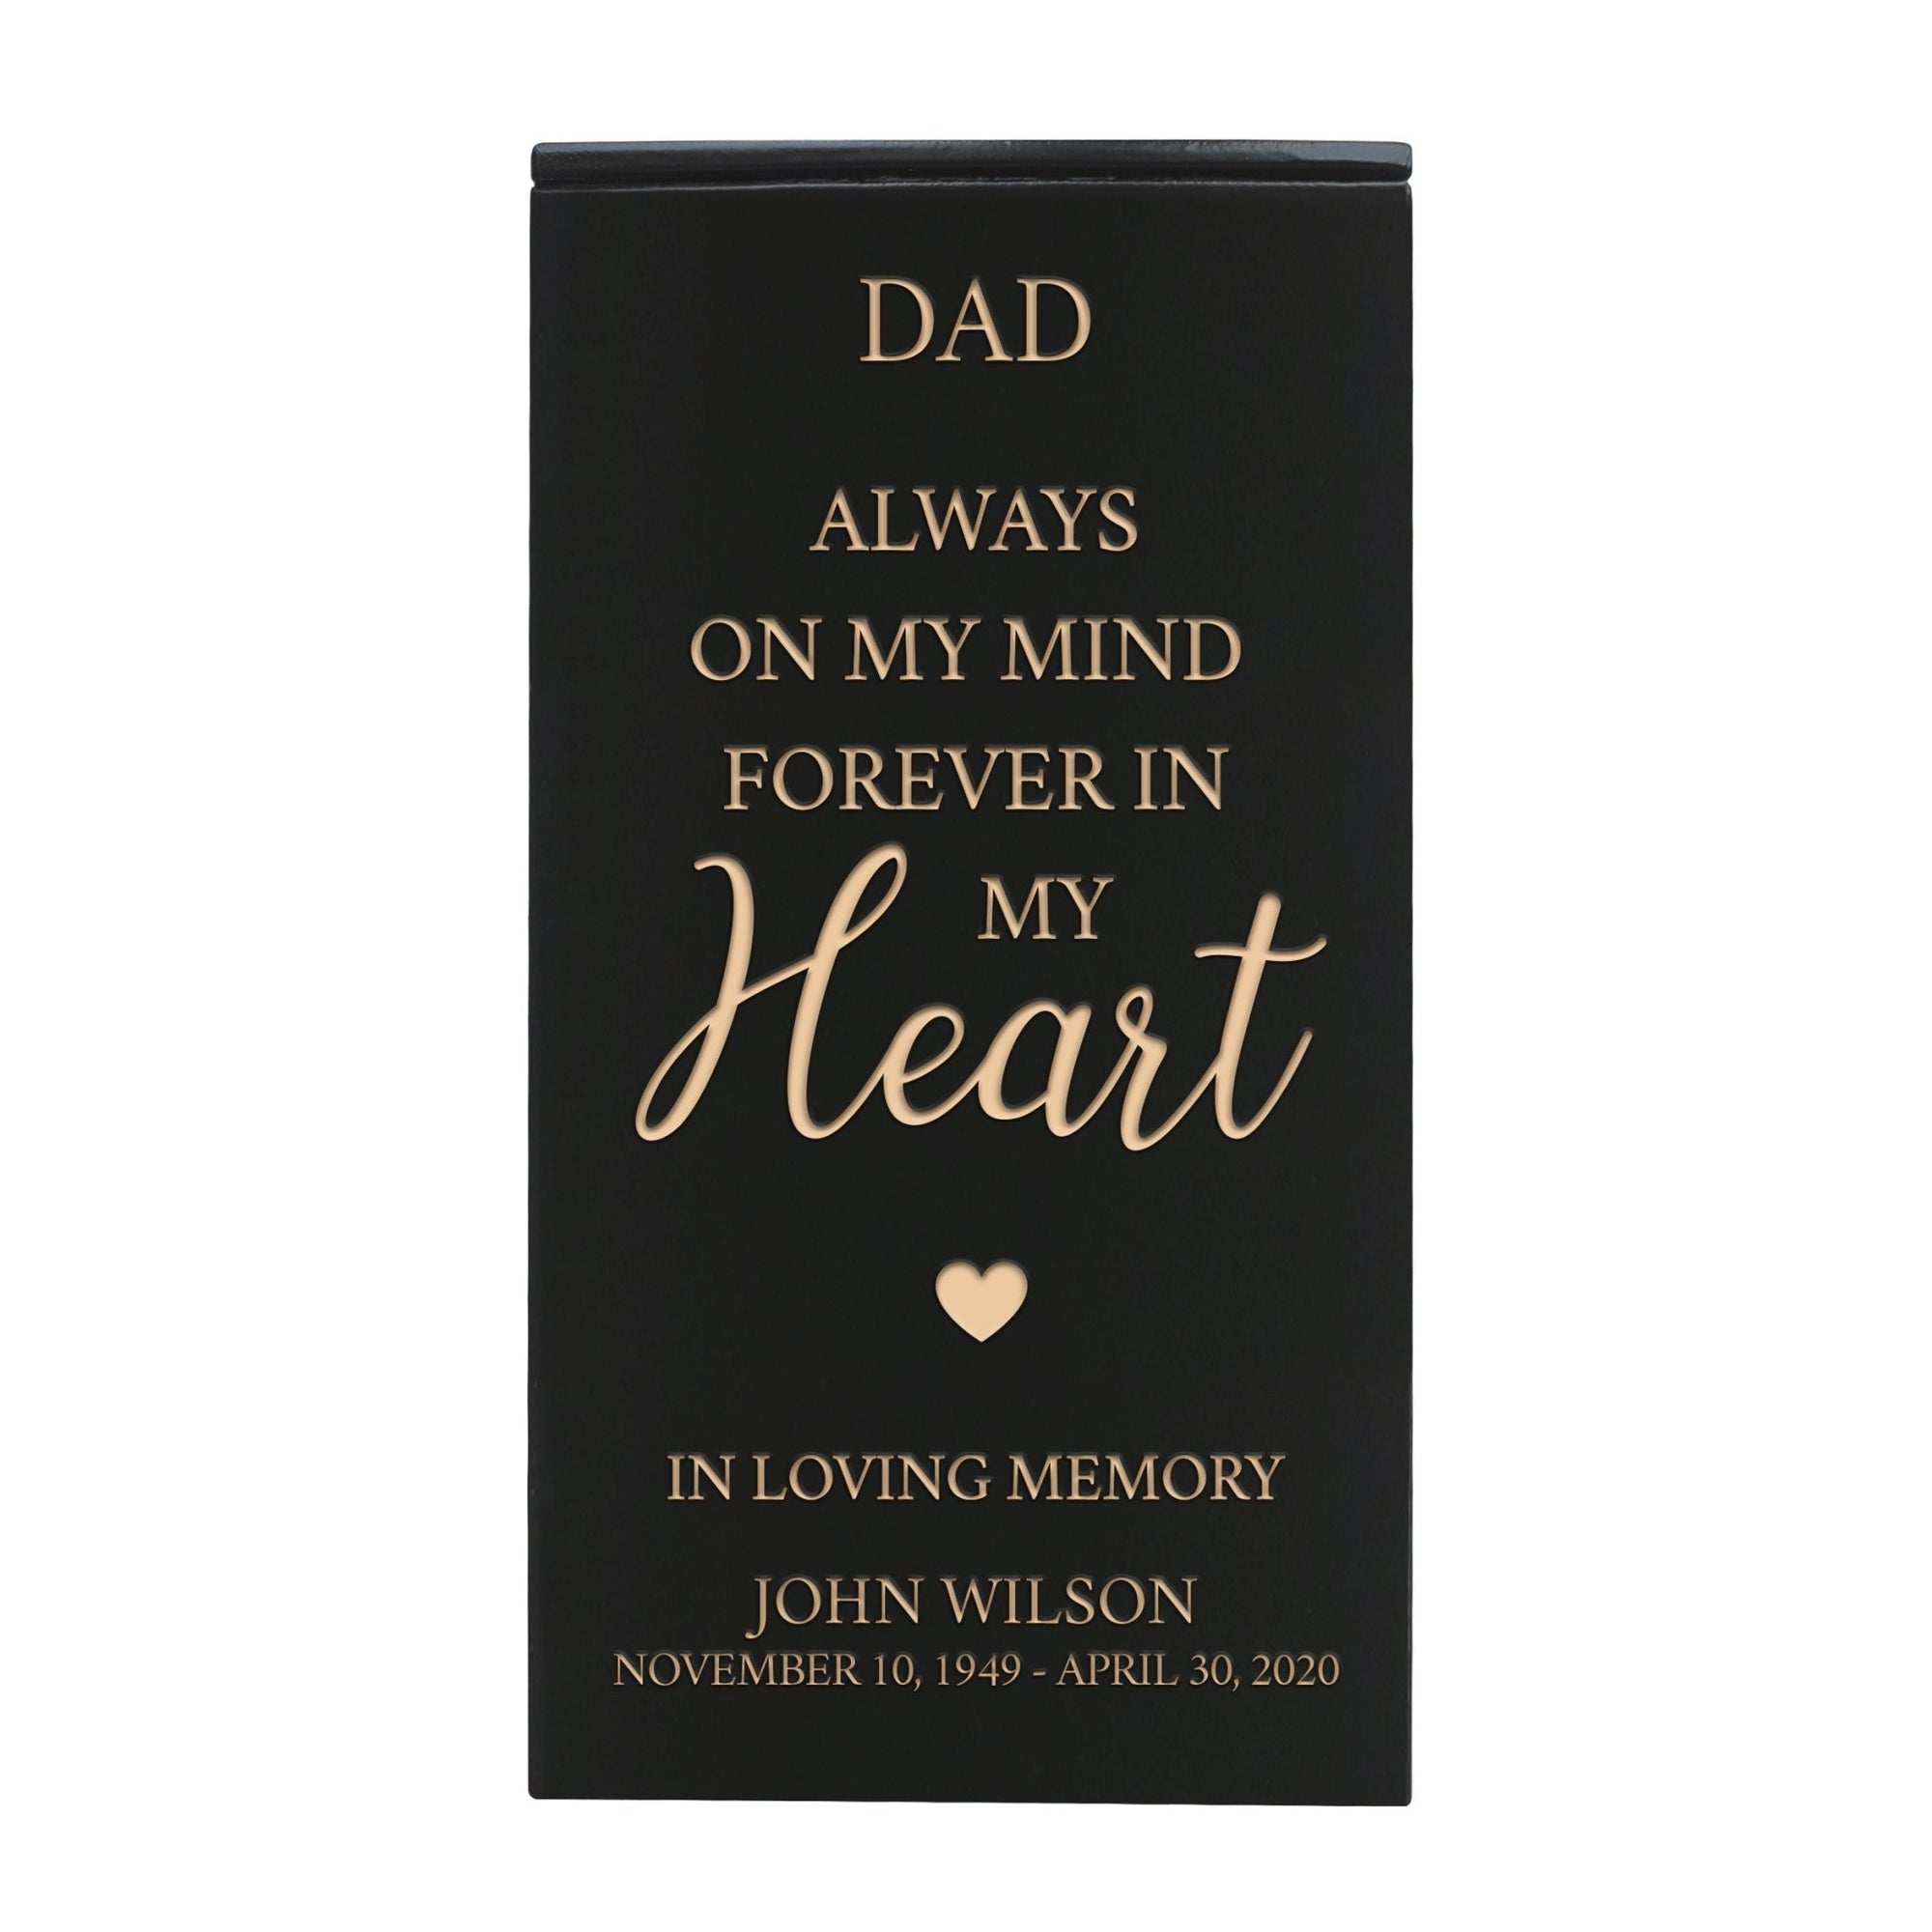 Custom Engraved Memorial Cremation Keepsake Urn Box holds 100 cu in of Ashes in - Dad, Always On My Mind - LifeSong Milestones